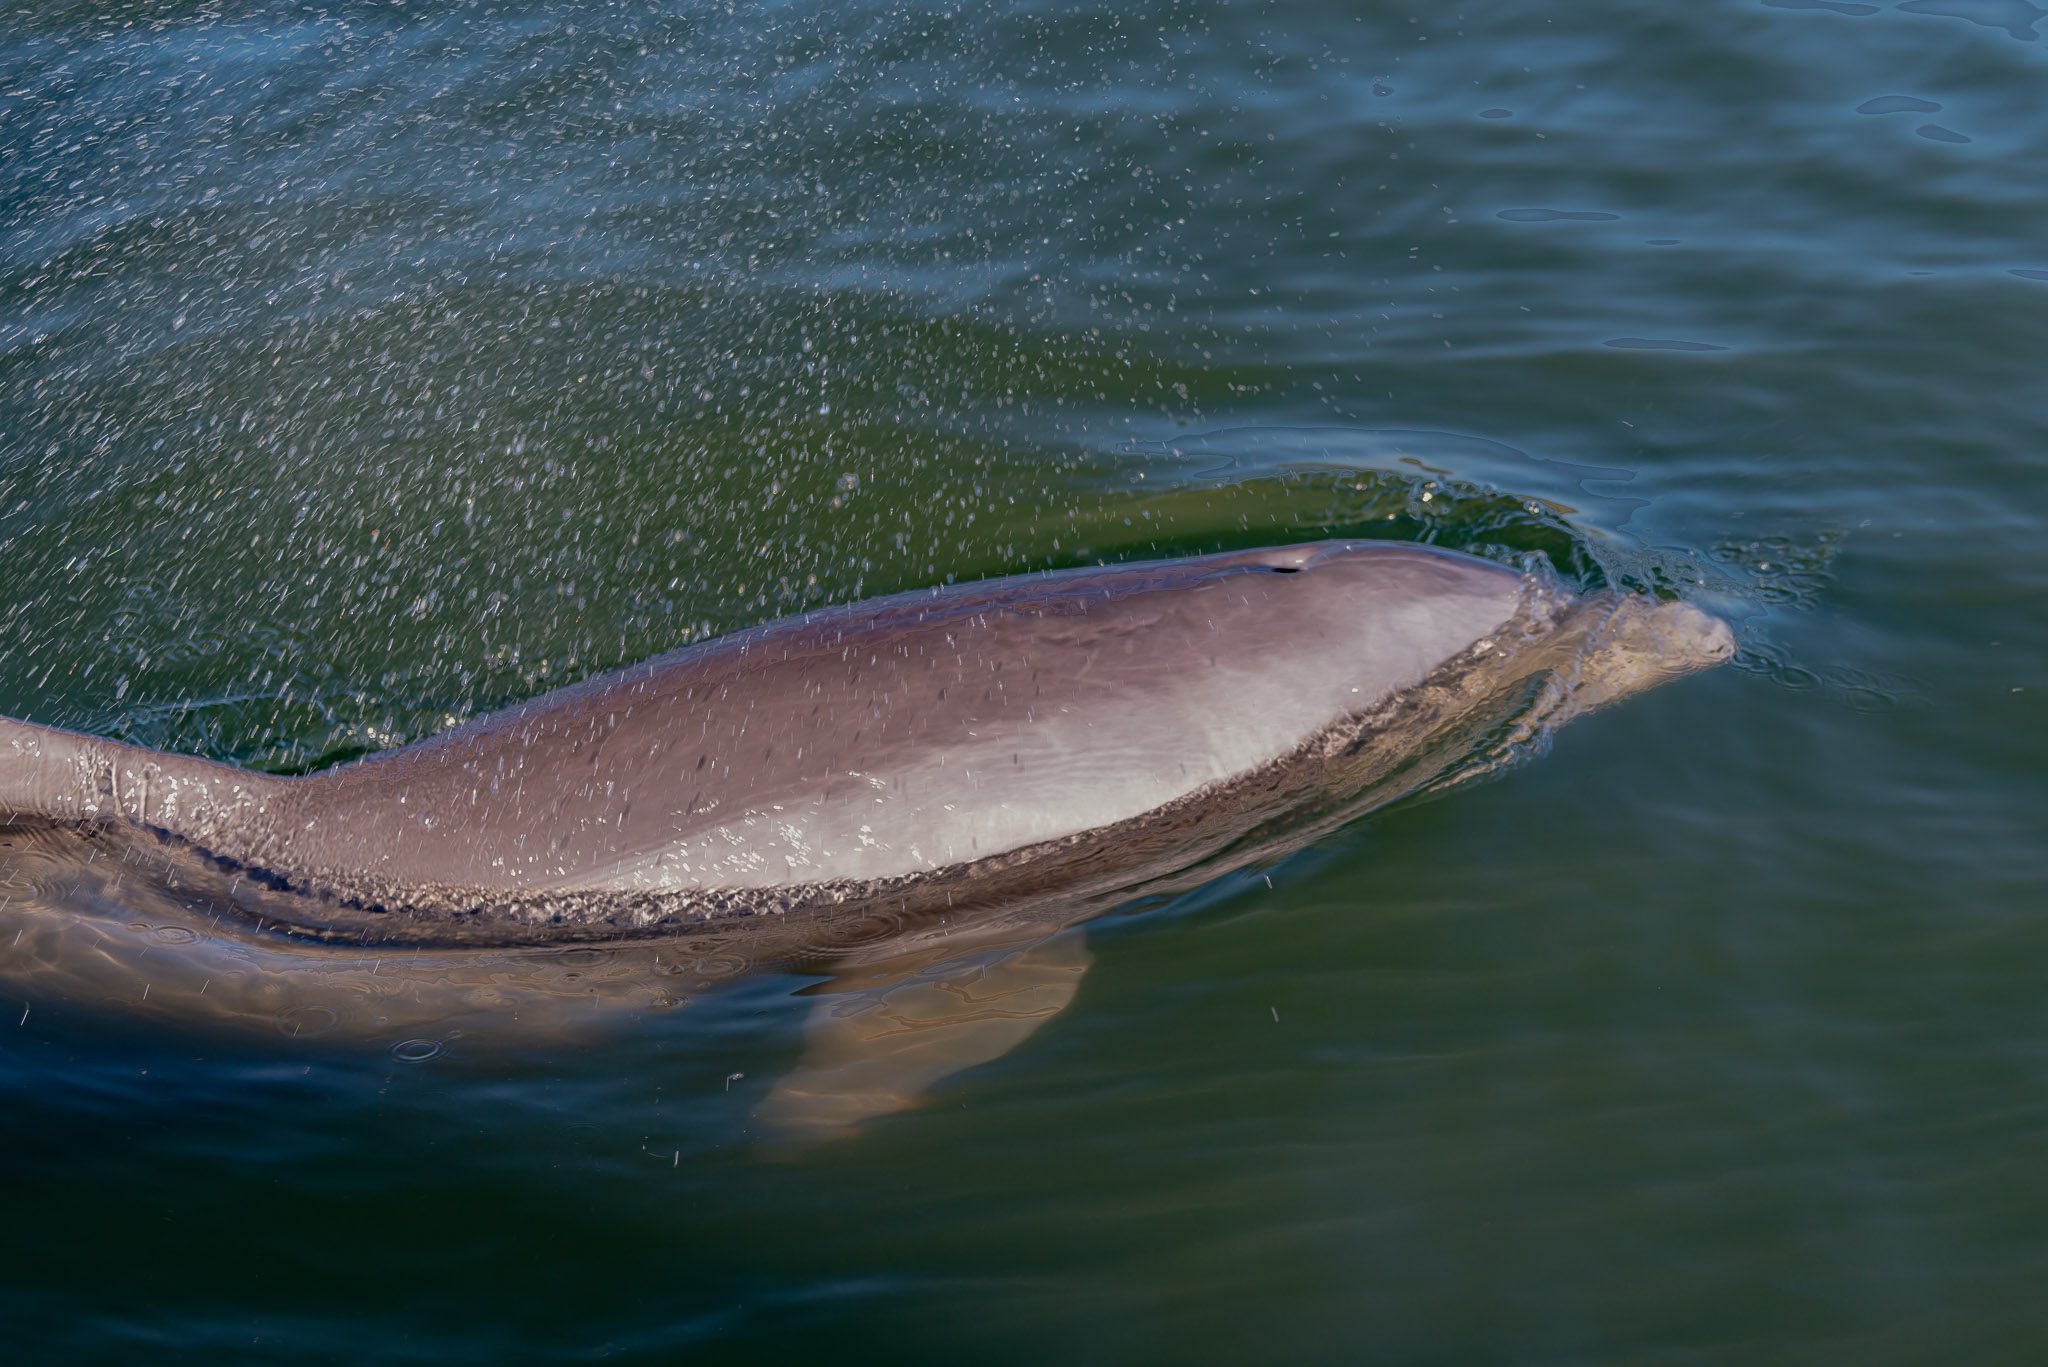 Bottlenose Dolphin surfacing to breath on a guided kayak tours in the Indian River Lagoon near the Apollo Beach Visitor Center & Turtle Mound in Canaveral National Seashore.